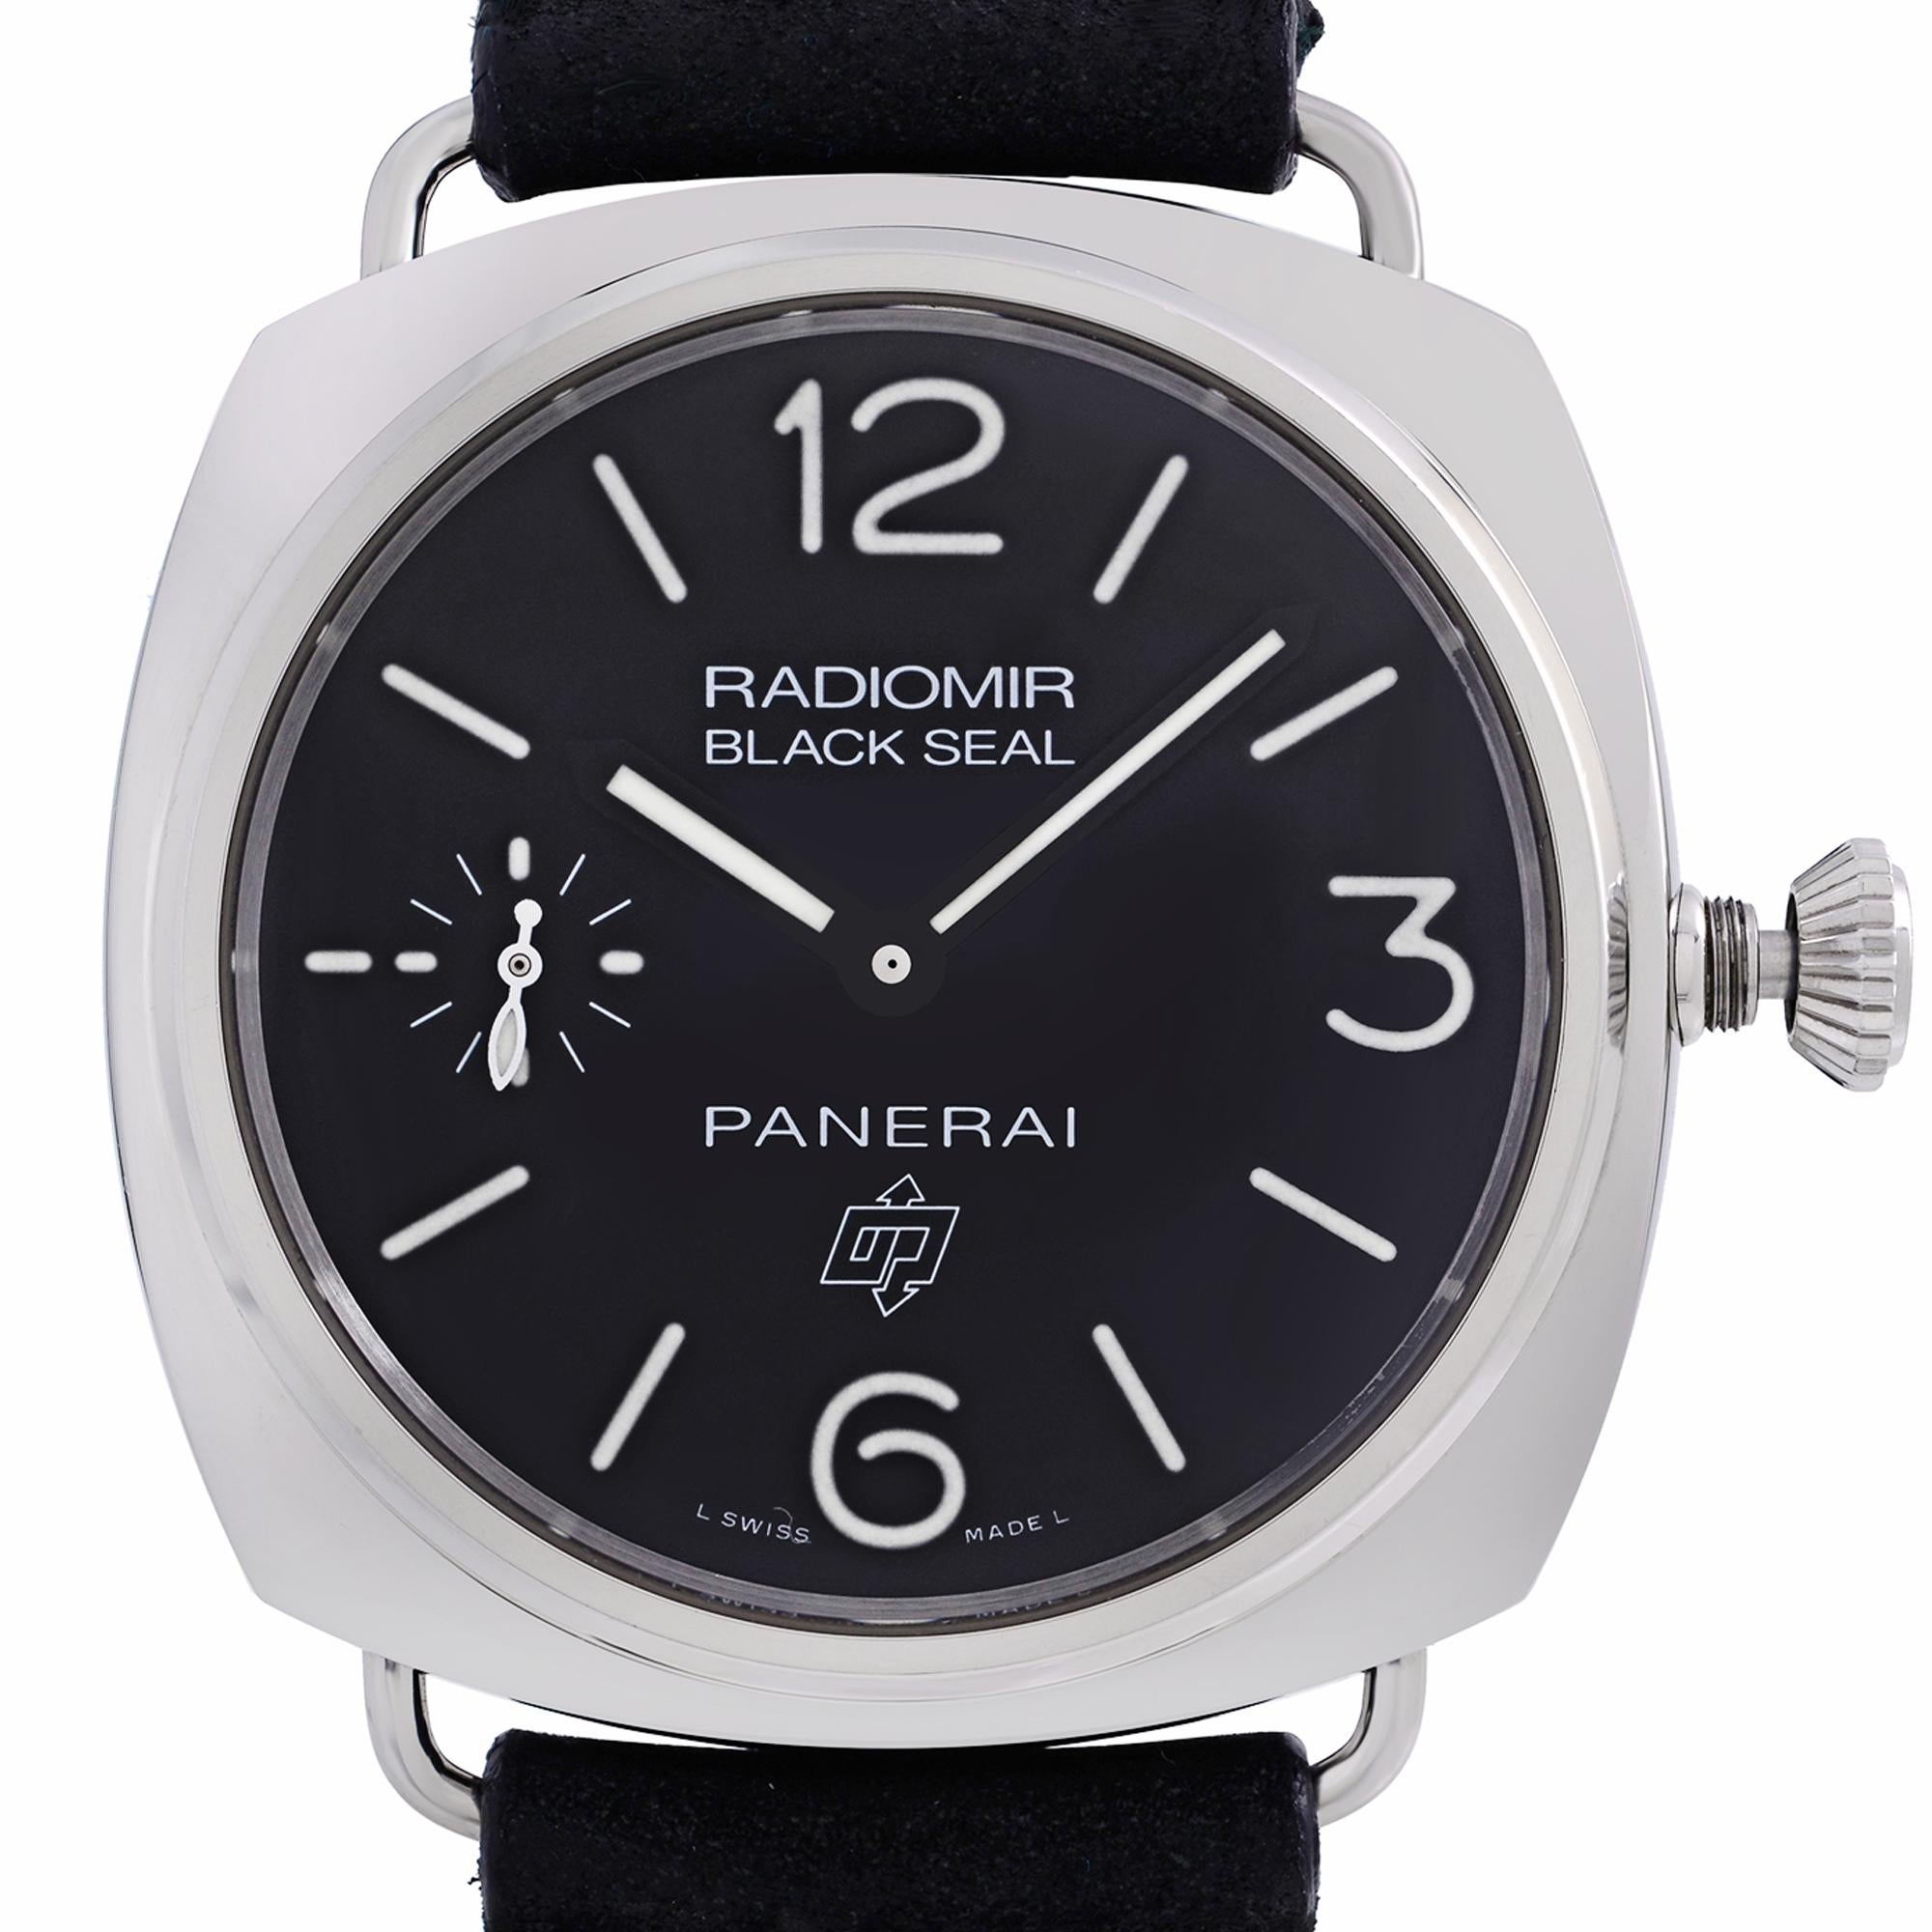 Pre-owned Good condition Panerai Radiomir Black Seal Steel Black Dial Hand Wind Men's Watch. Manufacturers' box and papers are included.

* Free Shipping within the USA
* Two-year warranty coverage
* 14-day return policy with a full refund. Buyers